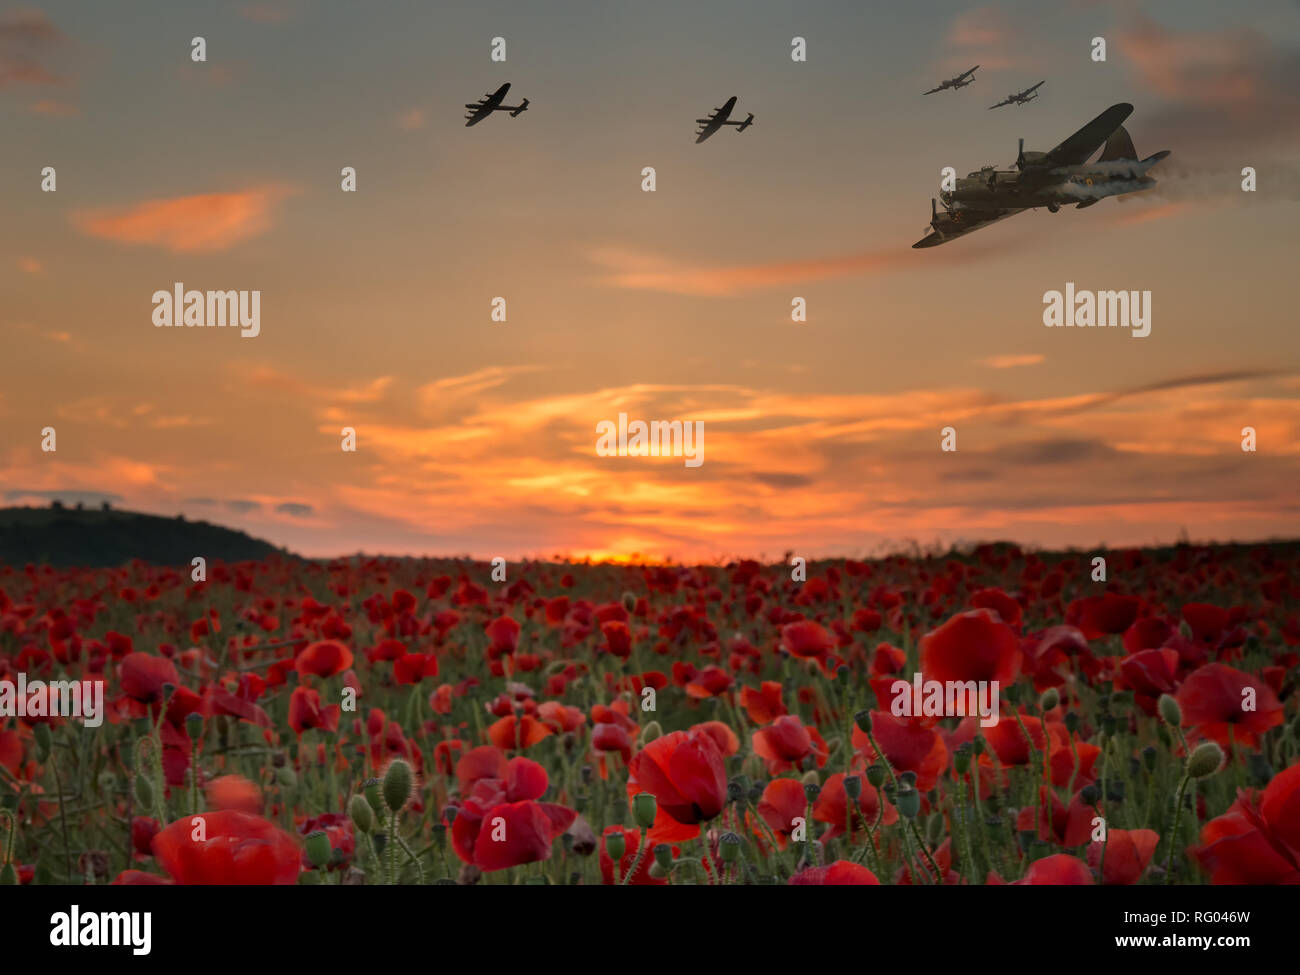 Lest we forget,scene of bomber planes flying over a poppy field as the sun goes down, Anzac day and Remembrance day. Stock Photo